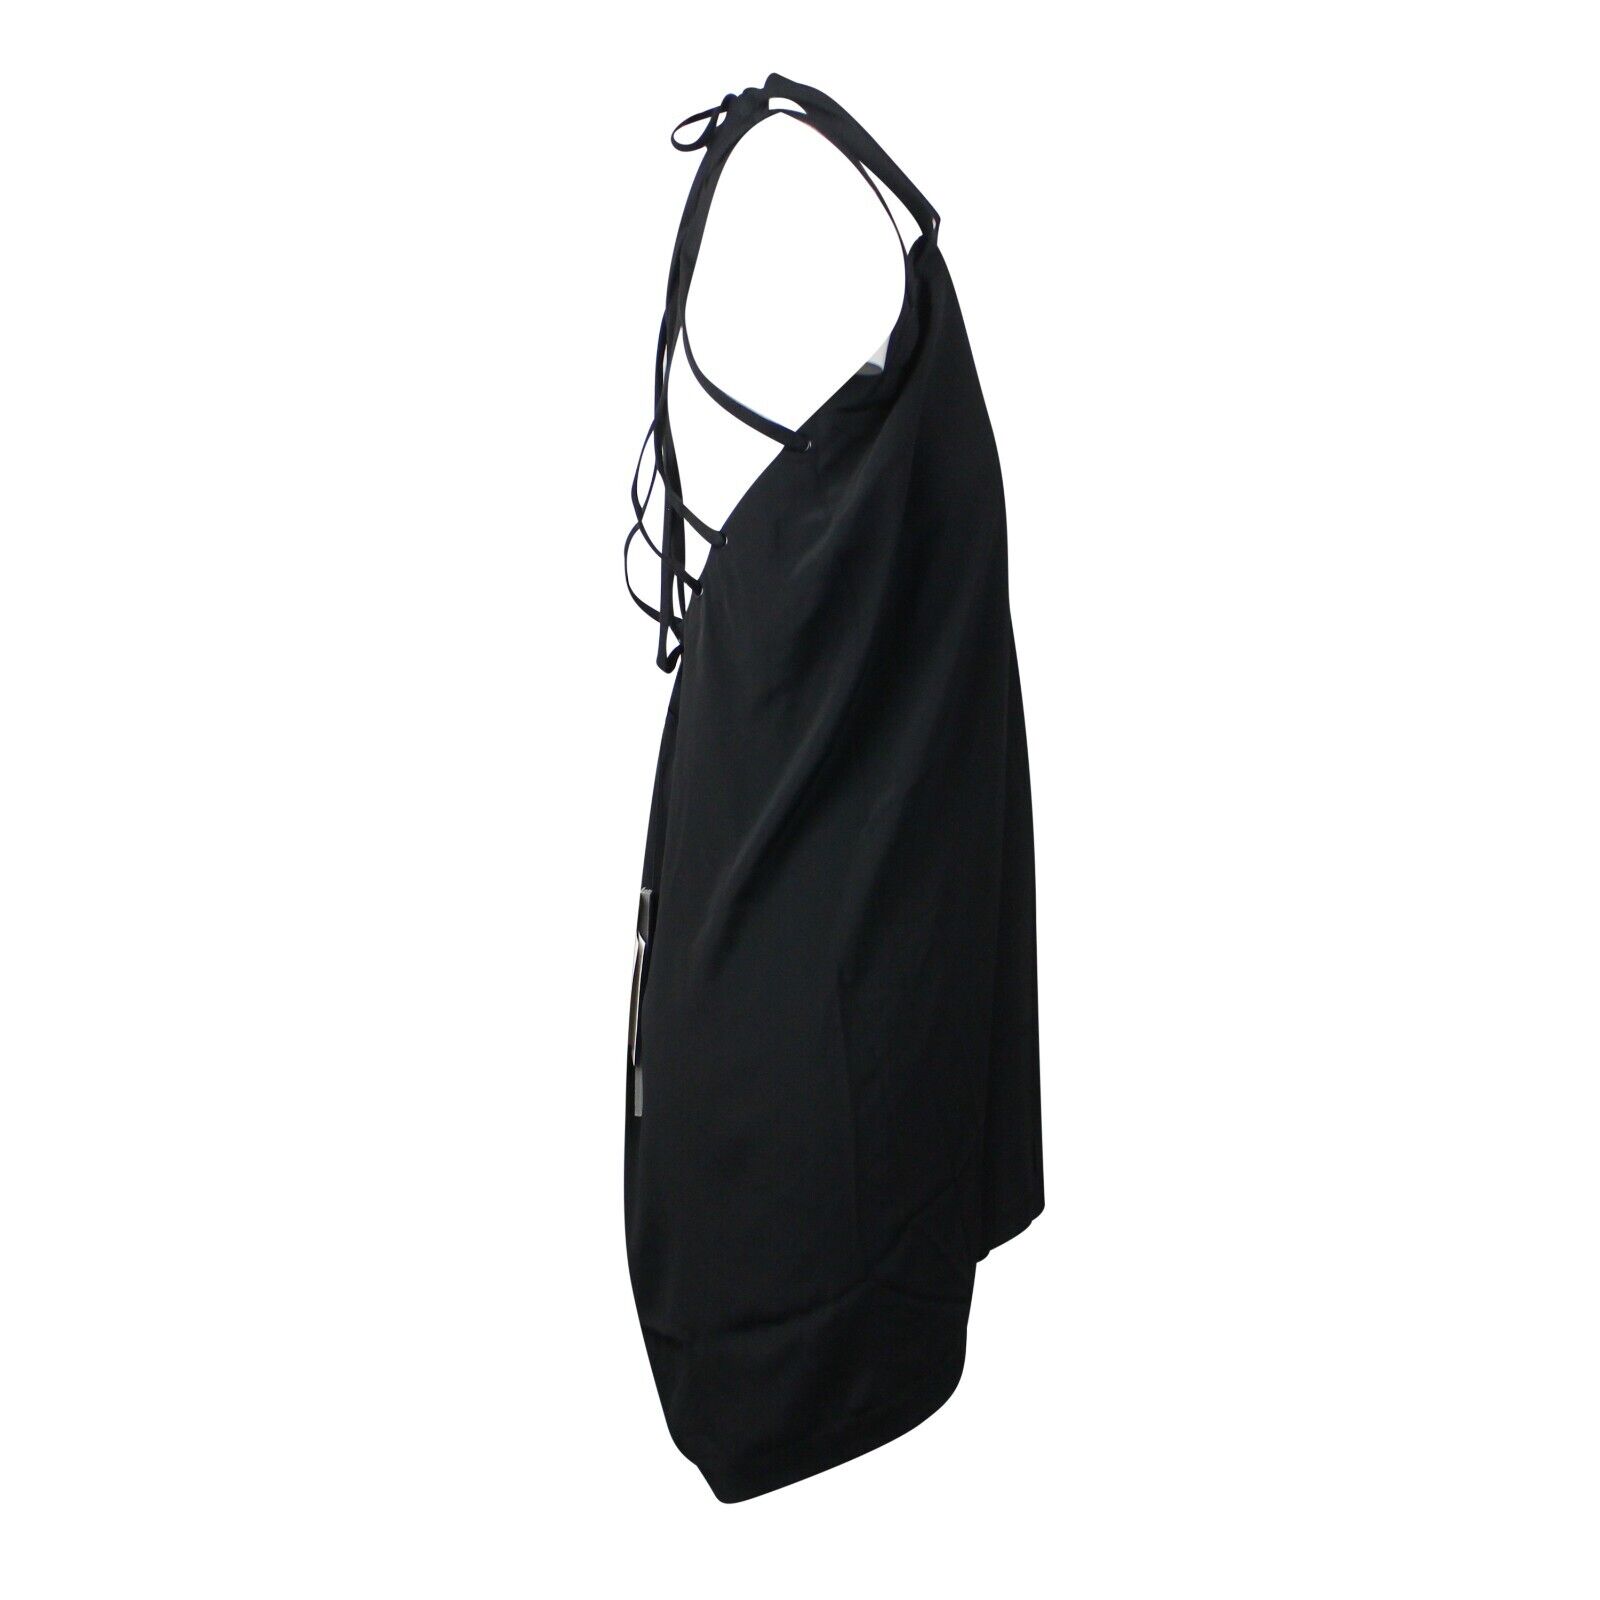 Pre-owned Rick Owens Black Megalaced Slip Dress Size 6/42 $1320